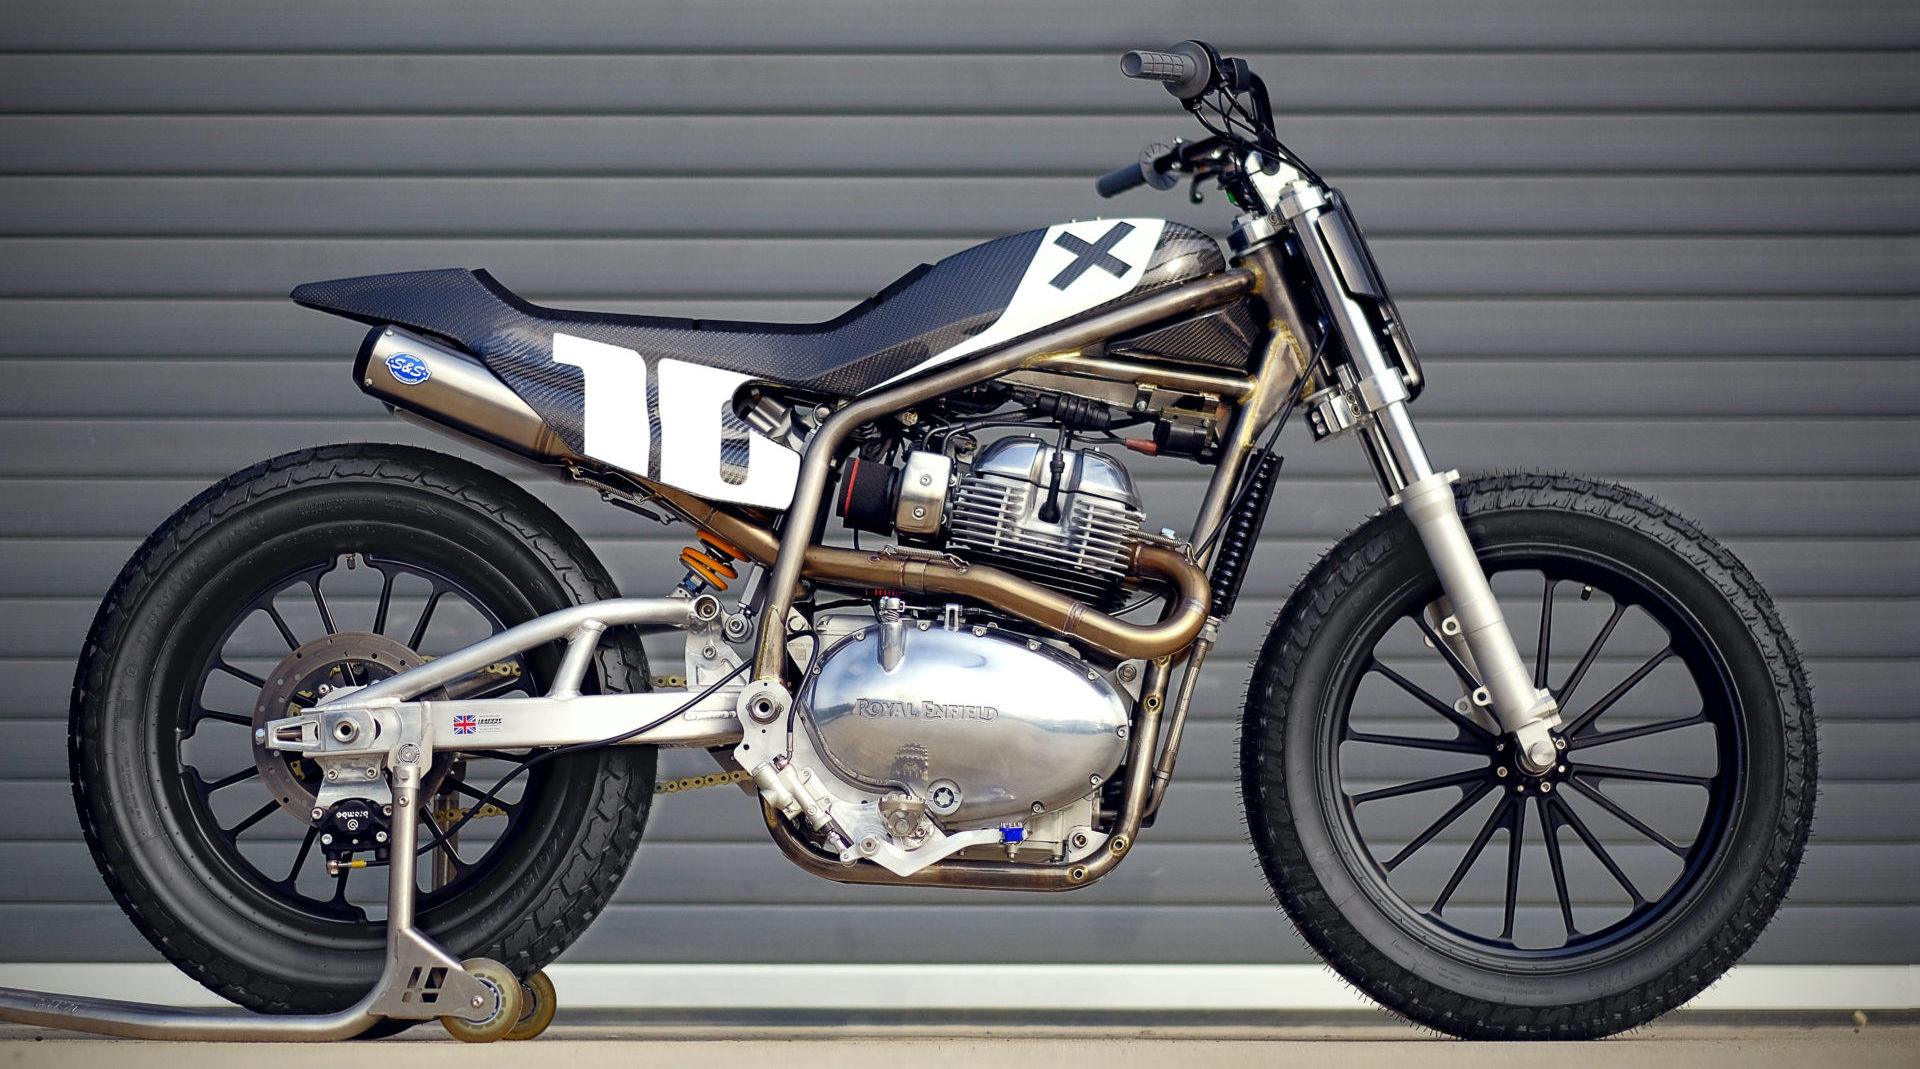 Johnny Lewis’ Royal Enfield INT650-based AFT Production Twins racebike. Photo courtesy of Royal Enfield North America.